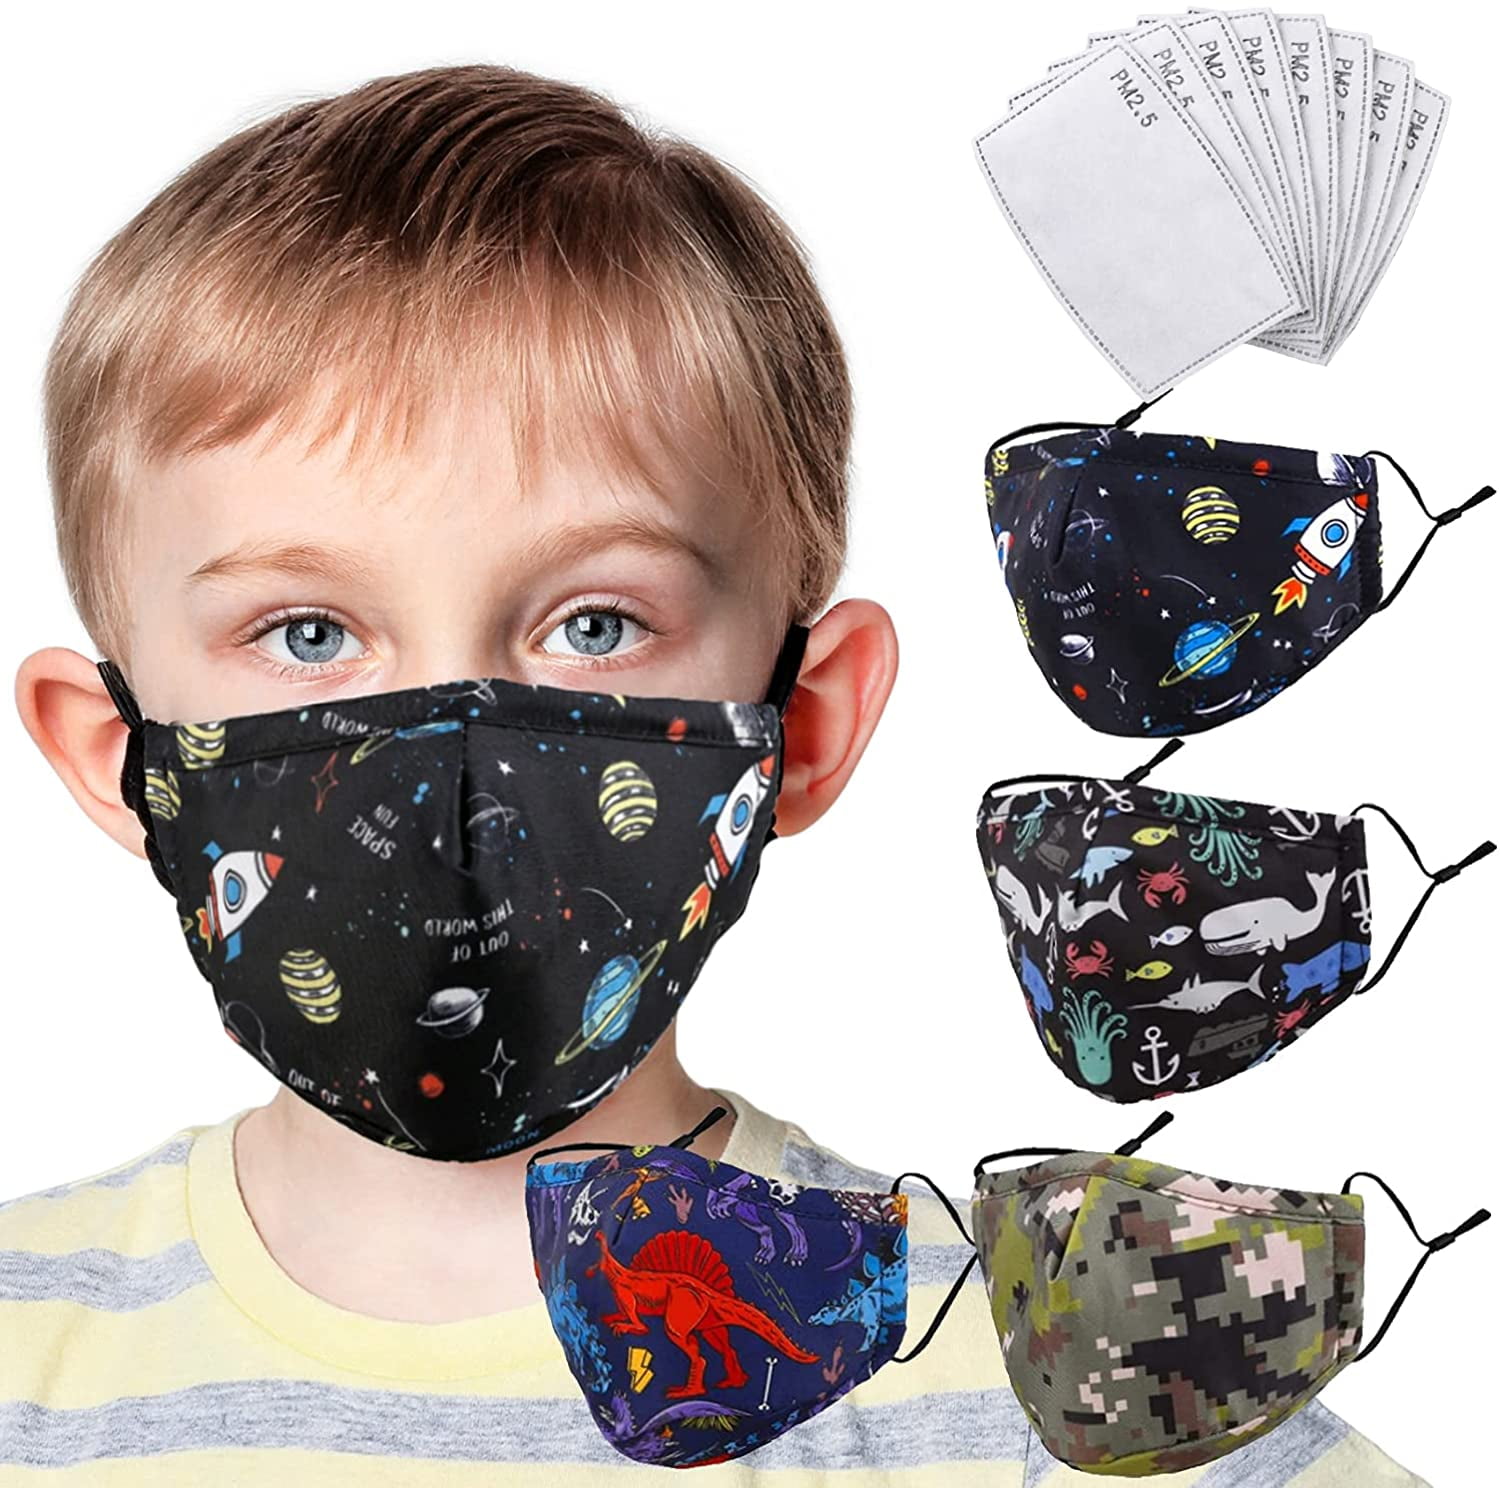 Weginte 50/100PCS Kids Face Bandanas Cover Children Breathable Mouth Kids Covering Protective Outdoor Cute Cartoon Pattern 